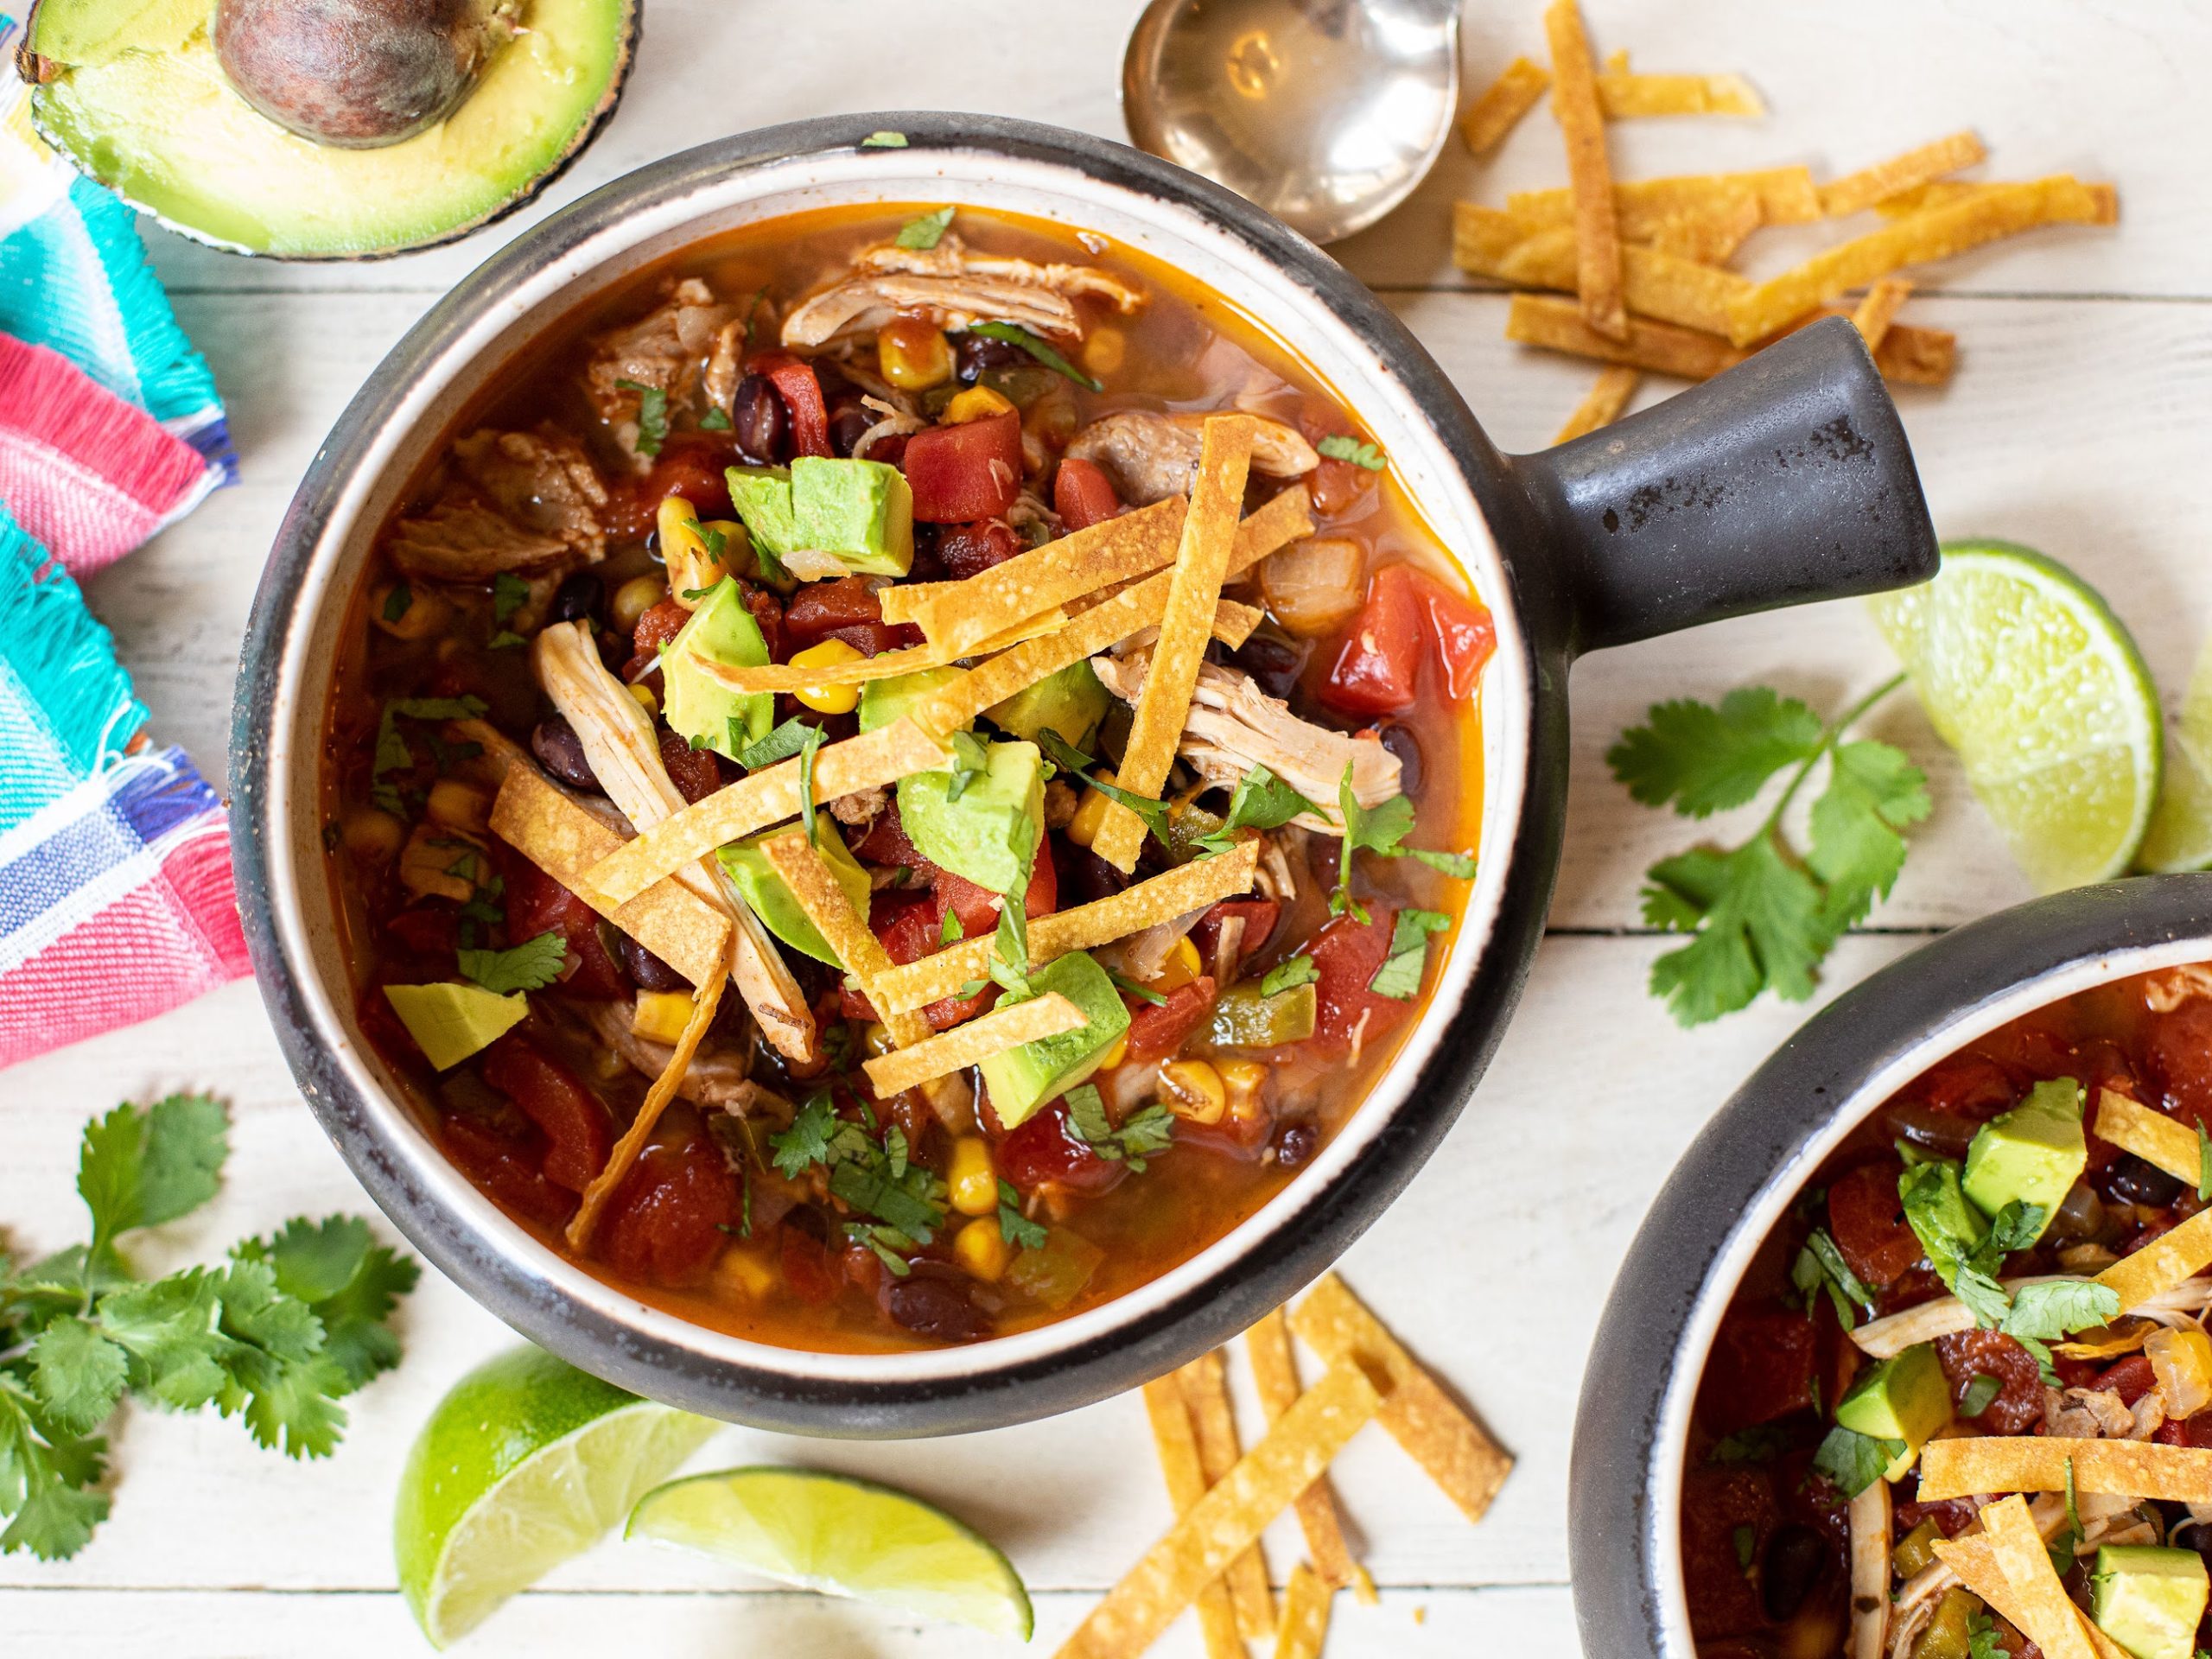 Serve Up Delicious Pressure Cooker Chicken Tortilla Soup And Earn Gift Cards With The Frozen Rewards Club At Publix on I Heart Publix